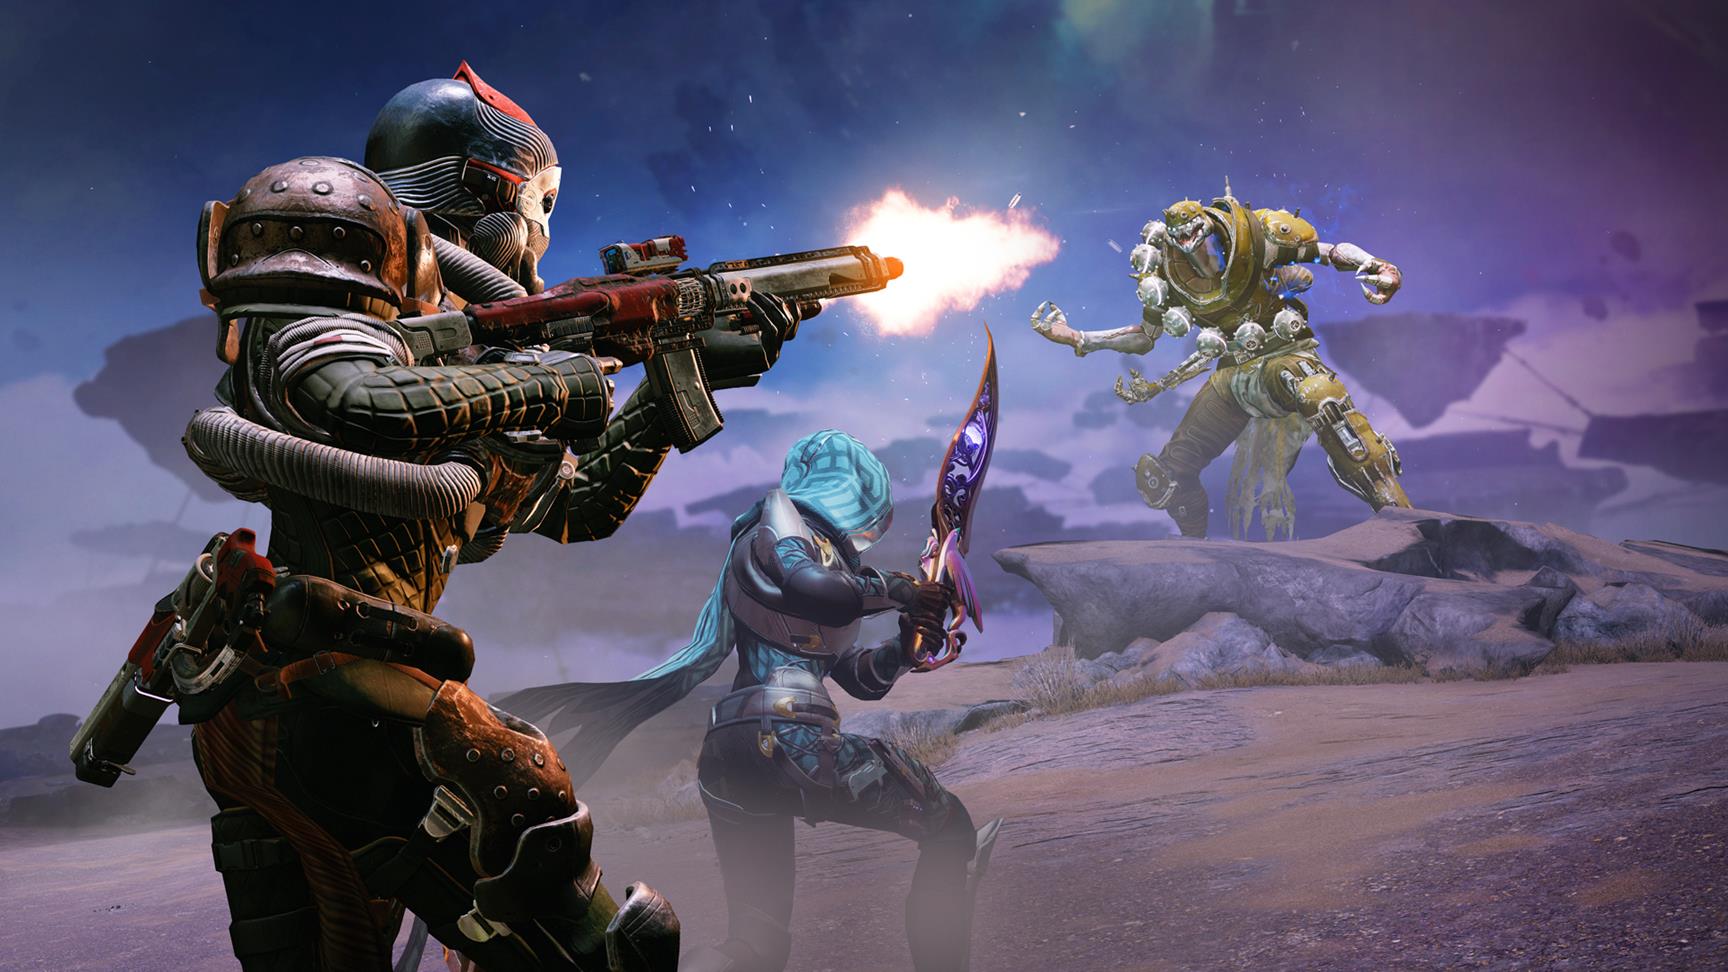 He wants a fight, Blue Team - Halo 5: Guardians review — GAMINGTREND